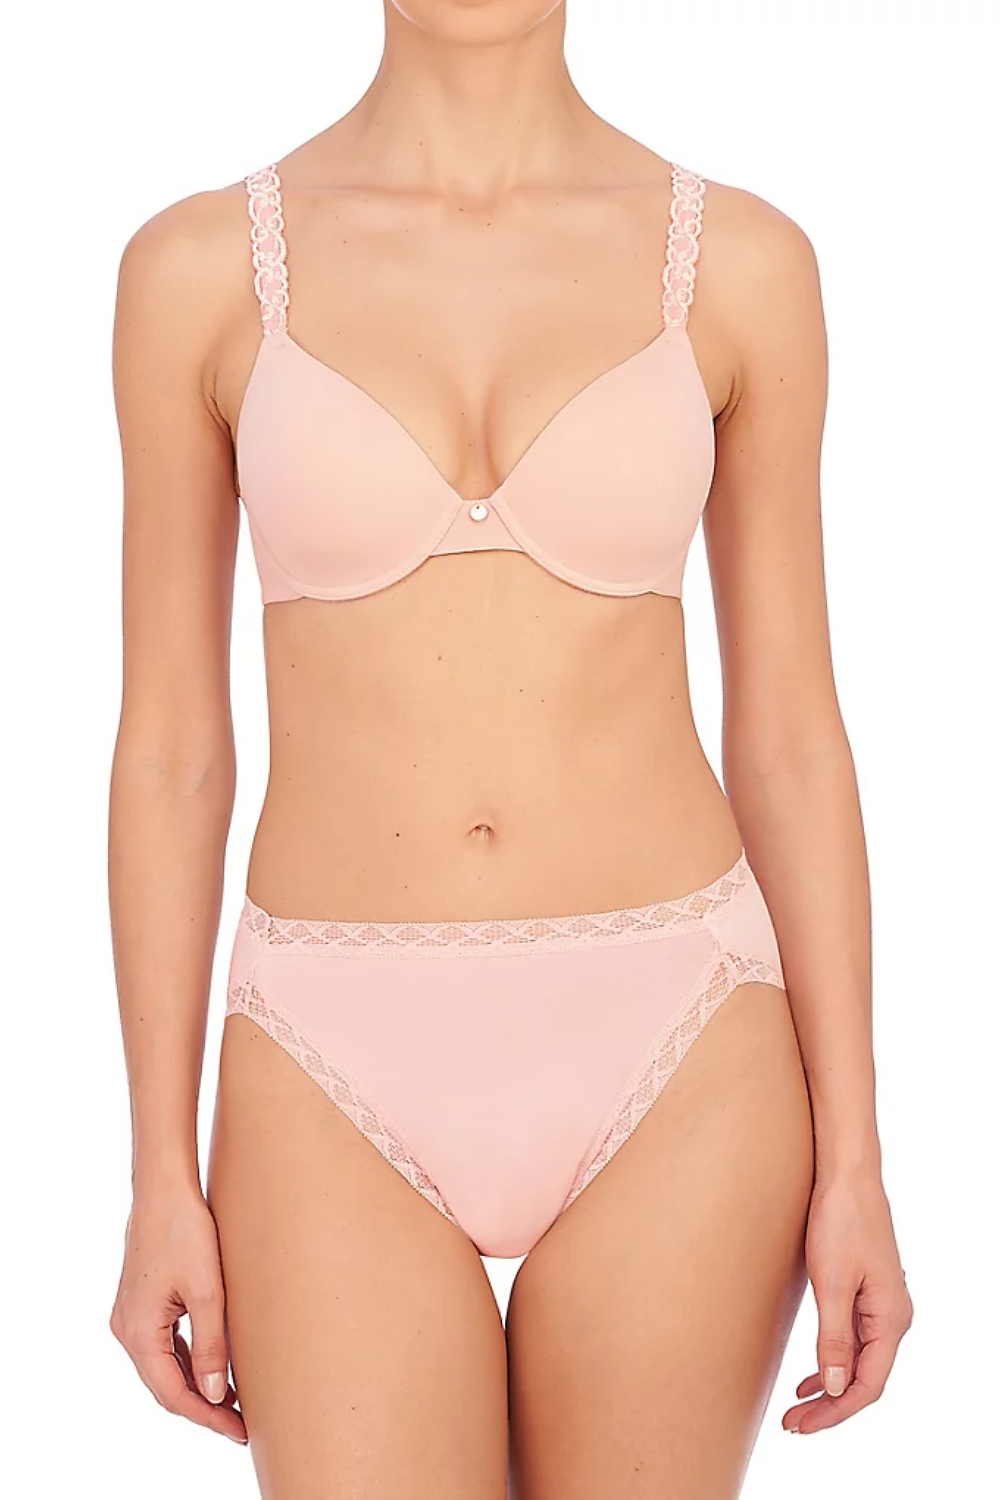 Bra Size Converter - How To Get The Perfect Size Every Time